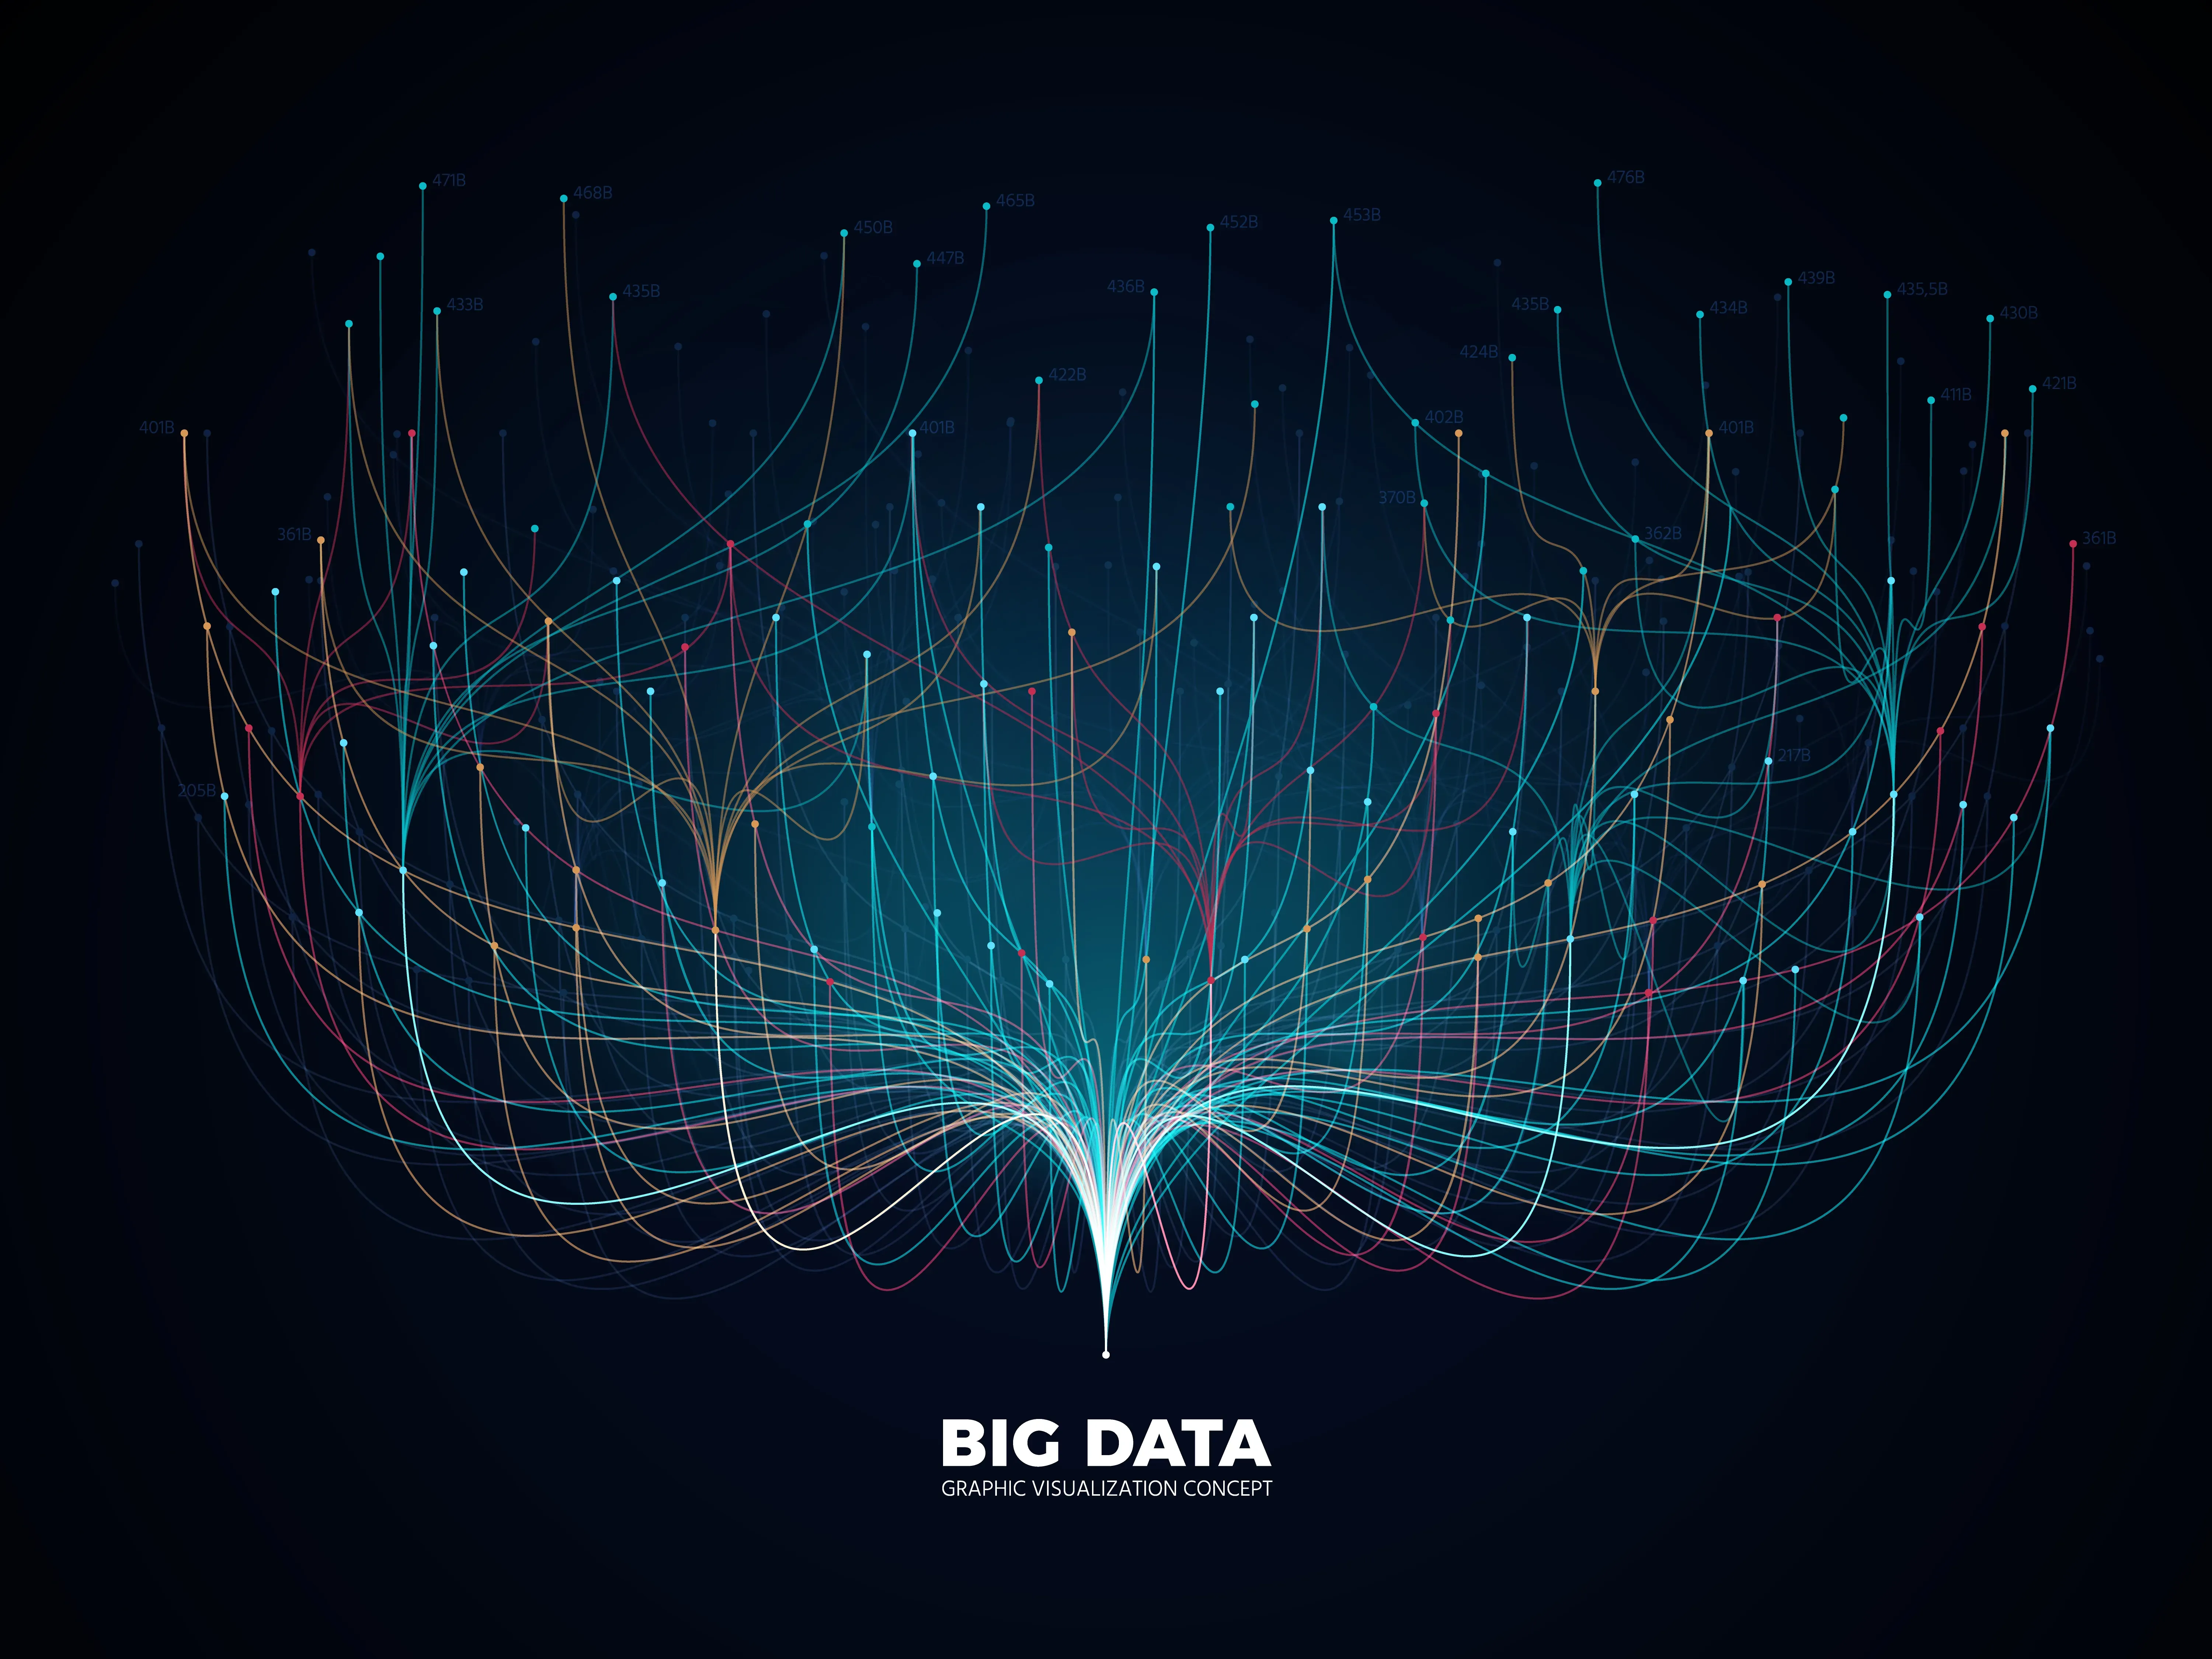 Hadoop and Spark Team Up to Tackle Big Data